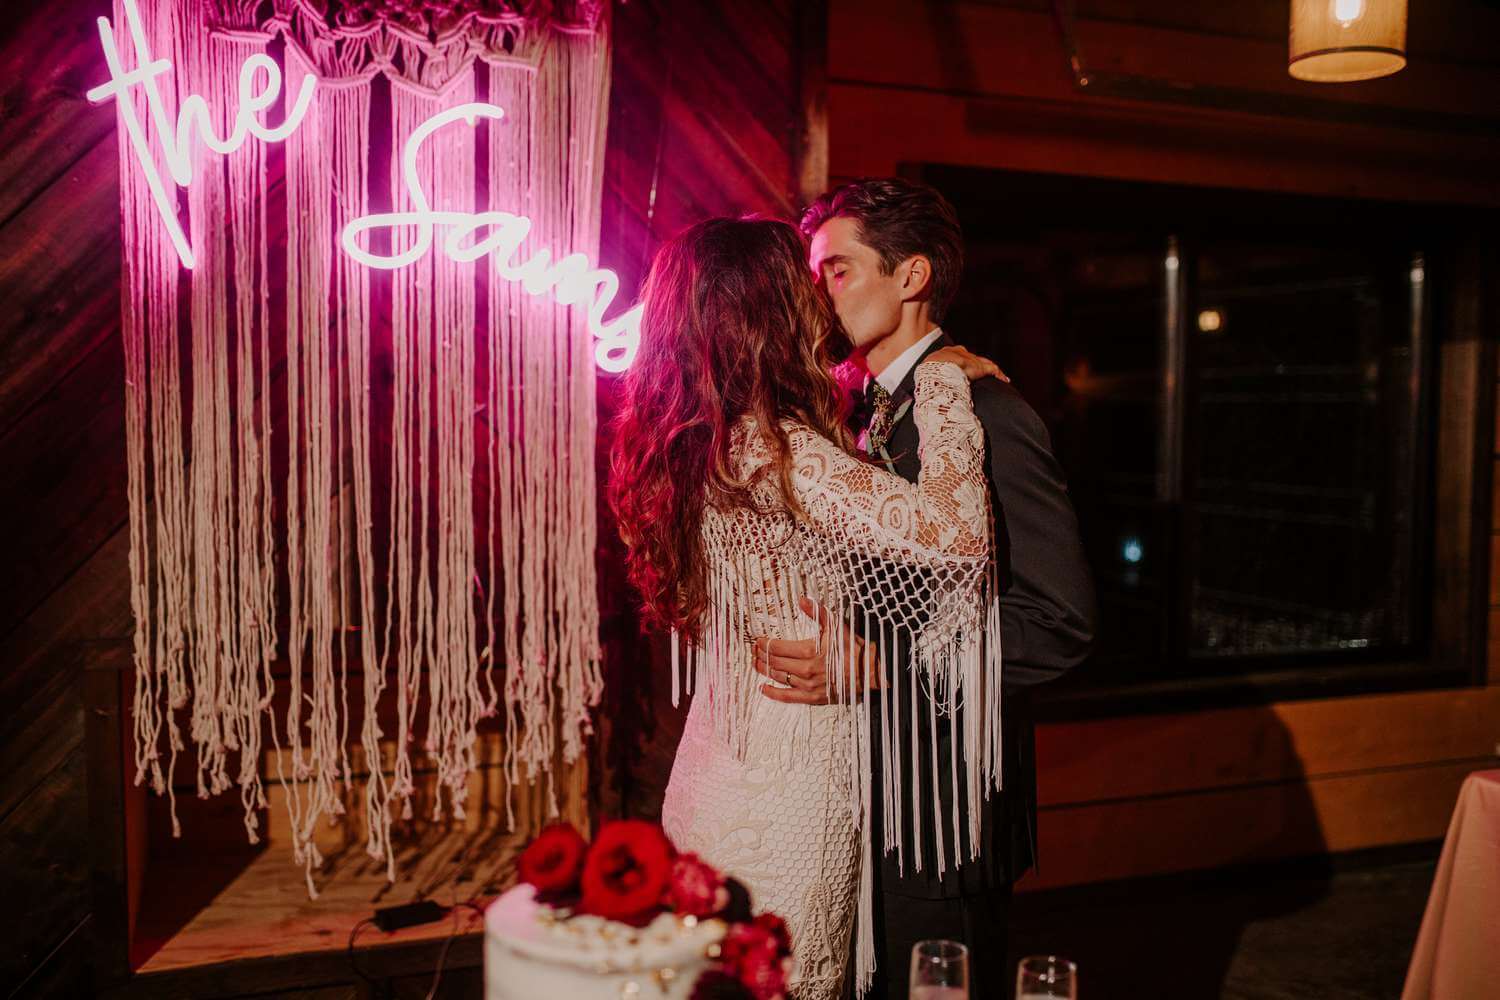 Creative ideas for aesthetic neon signs at weddings